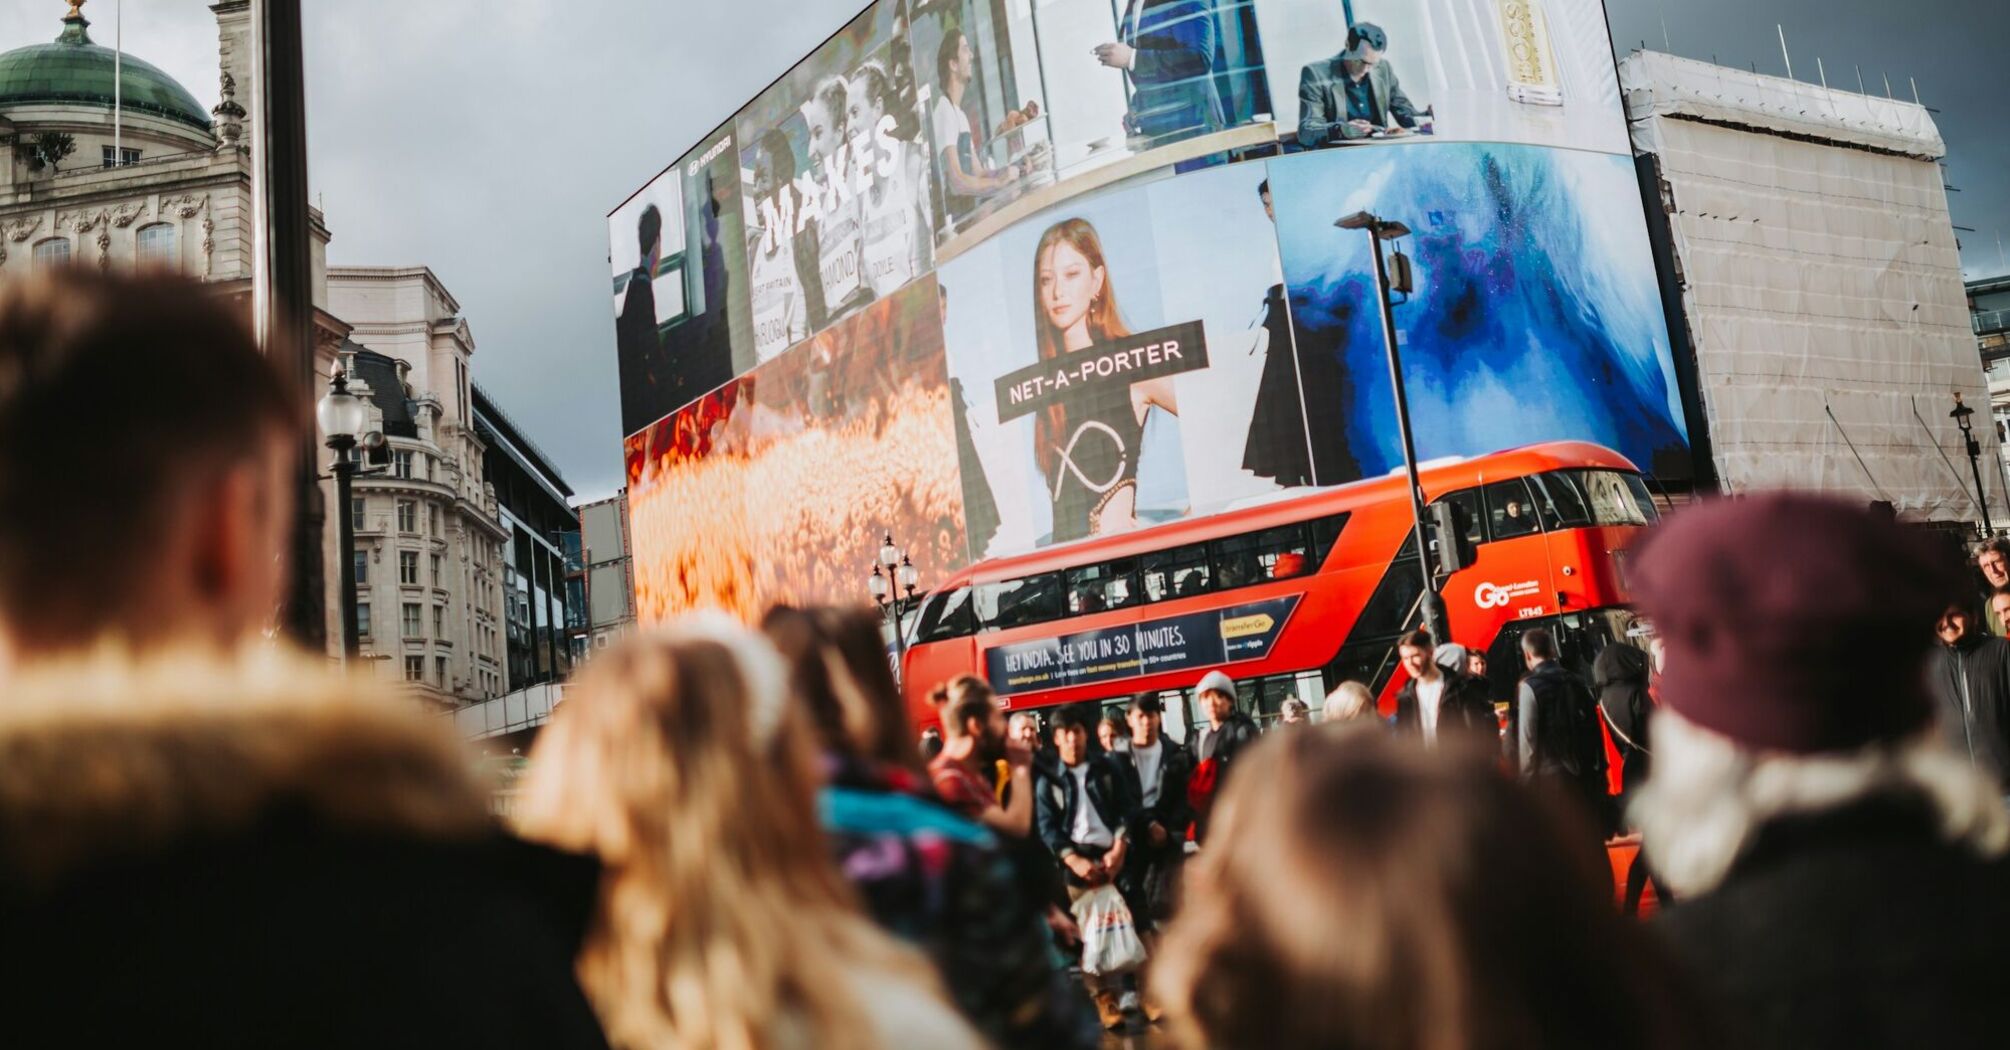 Crowded street in London with double-decker bus and digital billboards